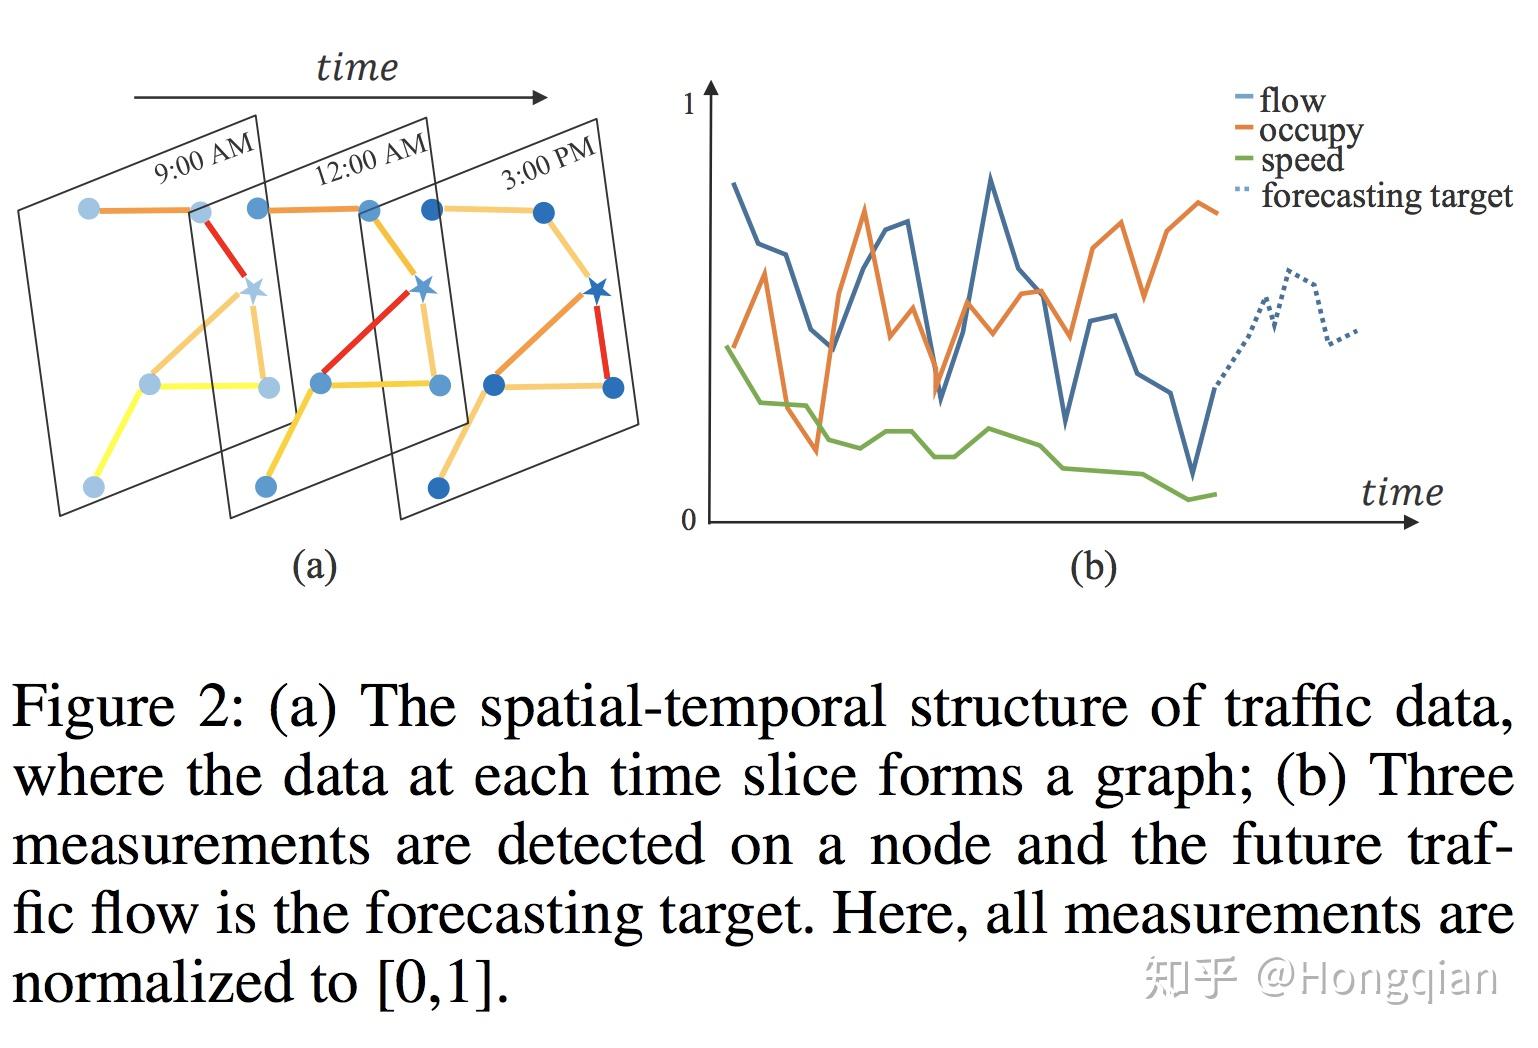 graphite travel time estimation based on attention spatiotemporal graphs